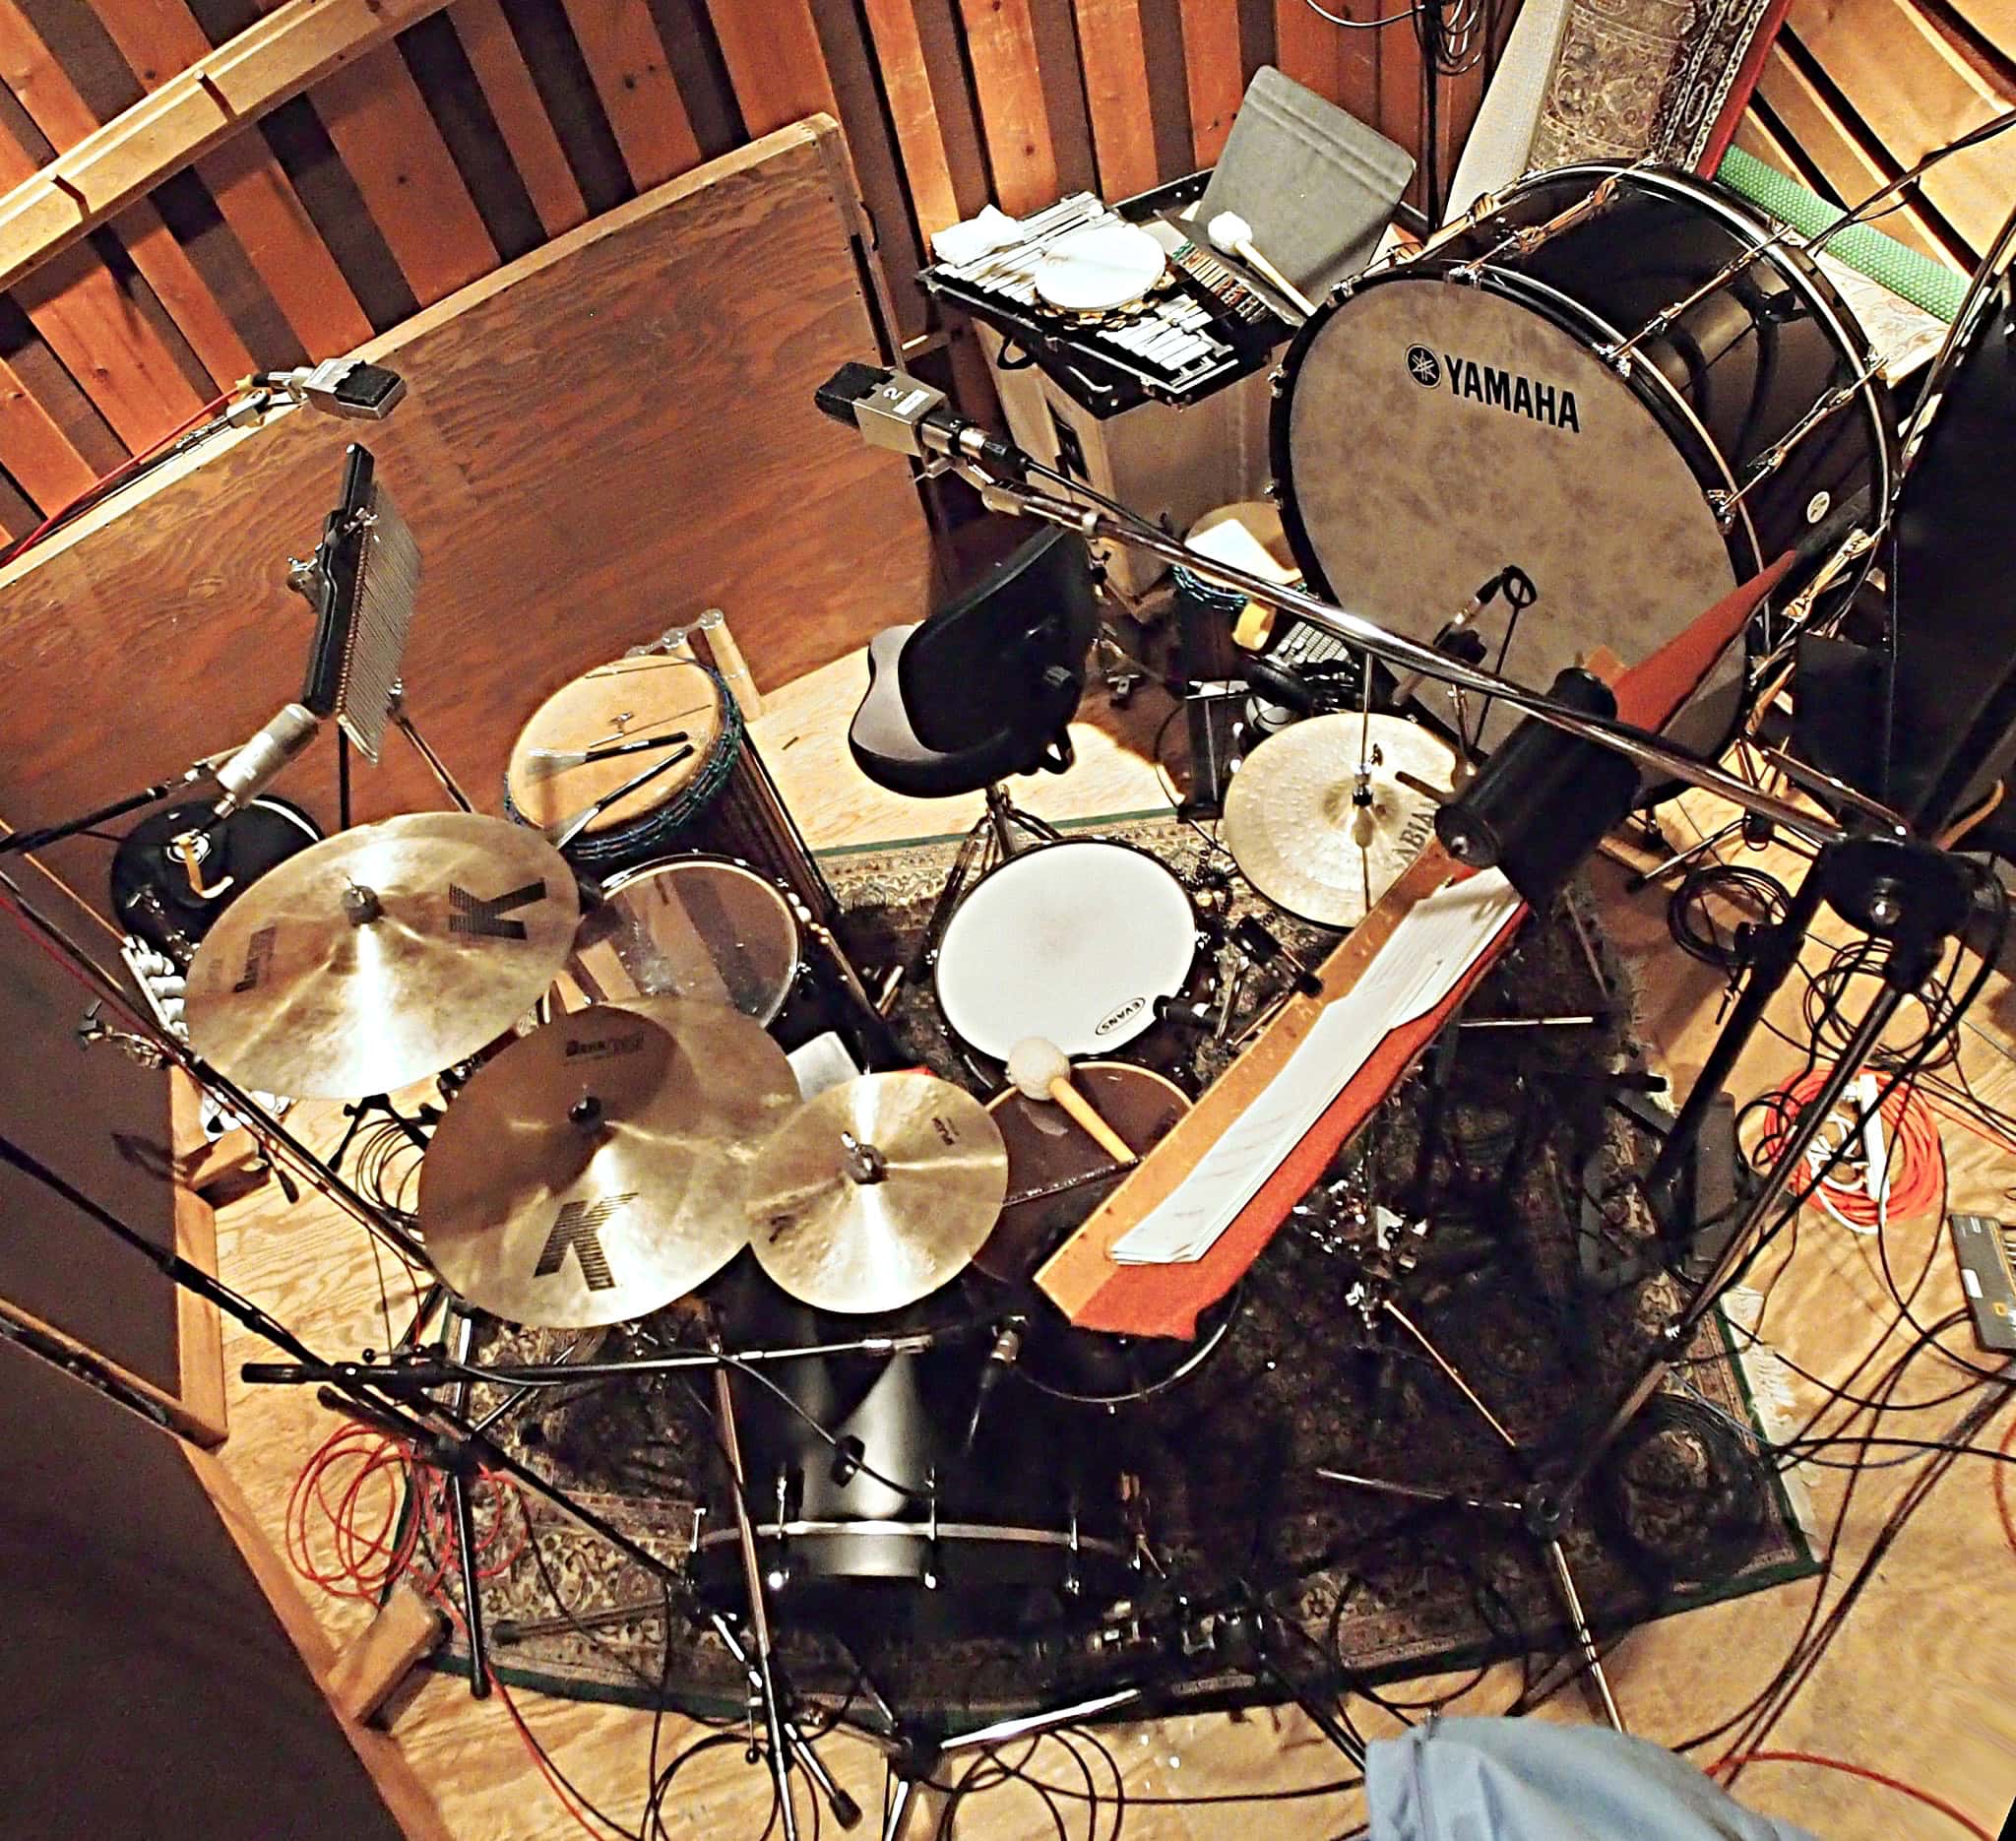 Paul Pizzuti's drum set setup for the 2014 recording session of NBC’s Peter Pan Live at Avatar Studios in New York City.